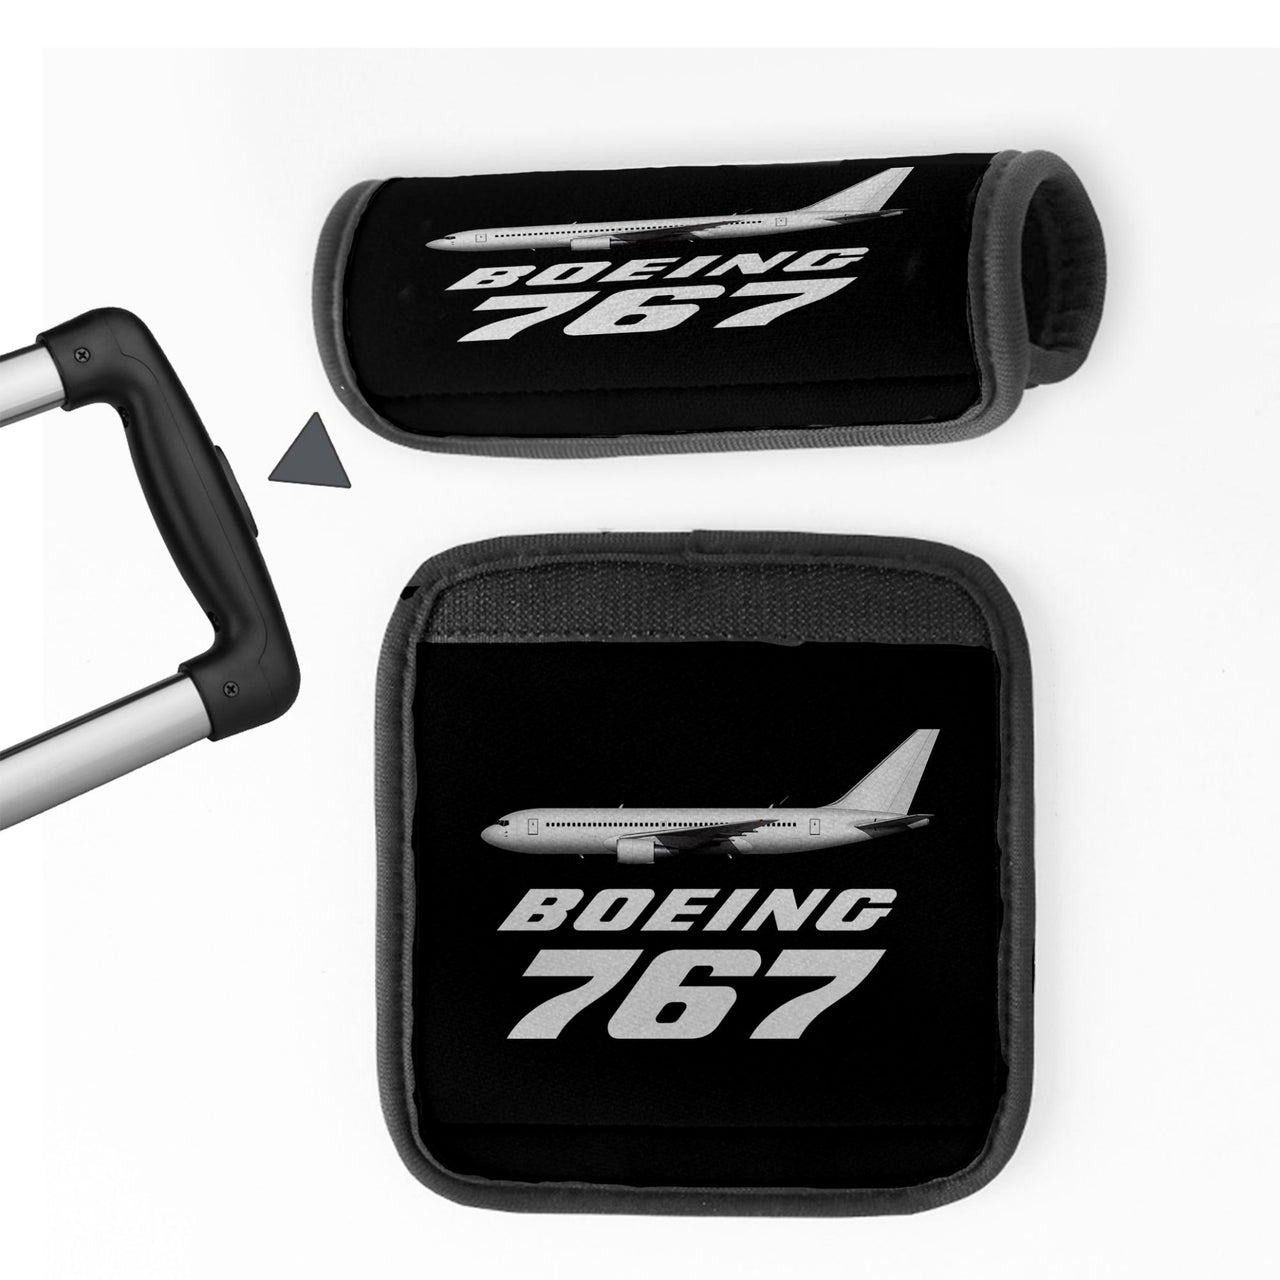 The Boeing 767 Designed Neoprene Luggage Handle Covers